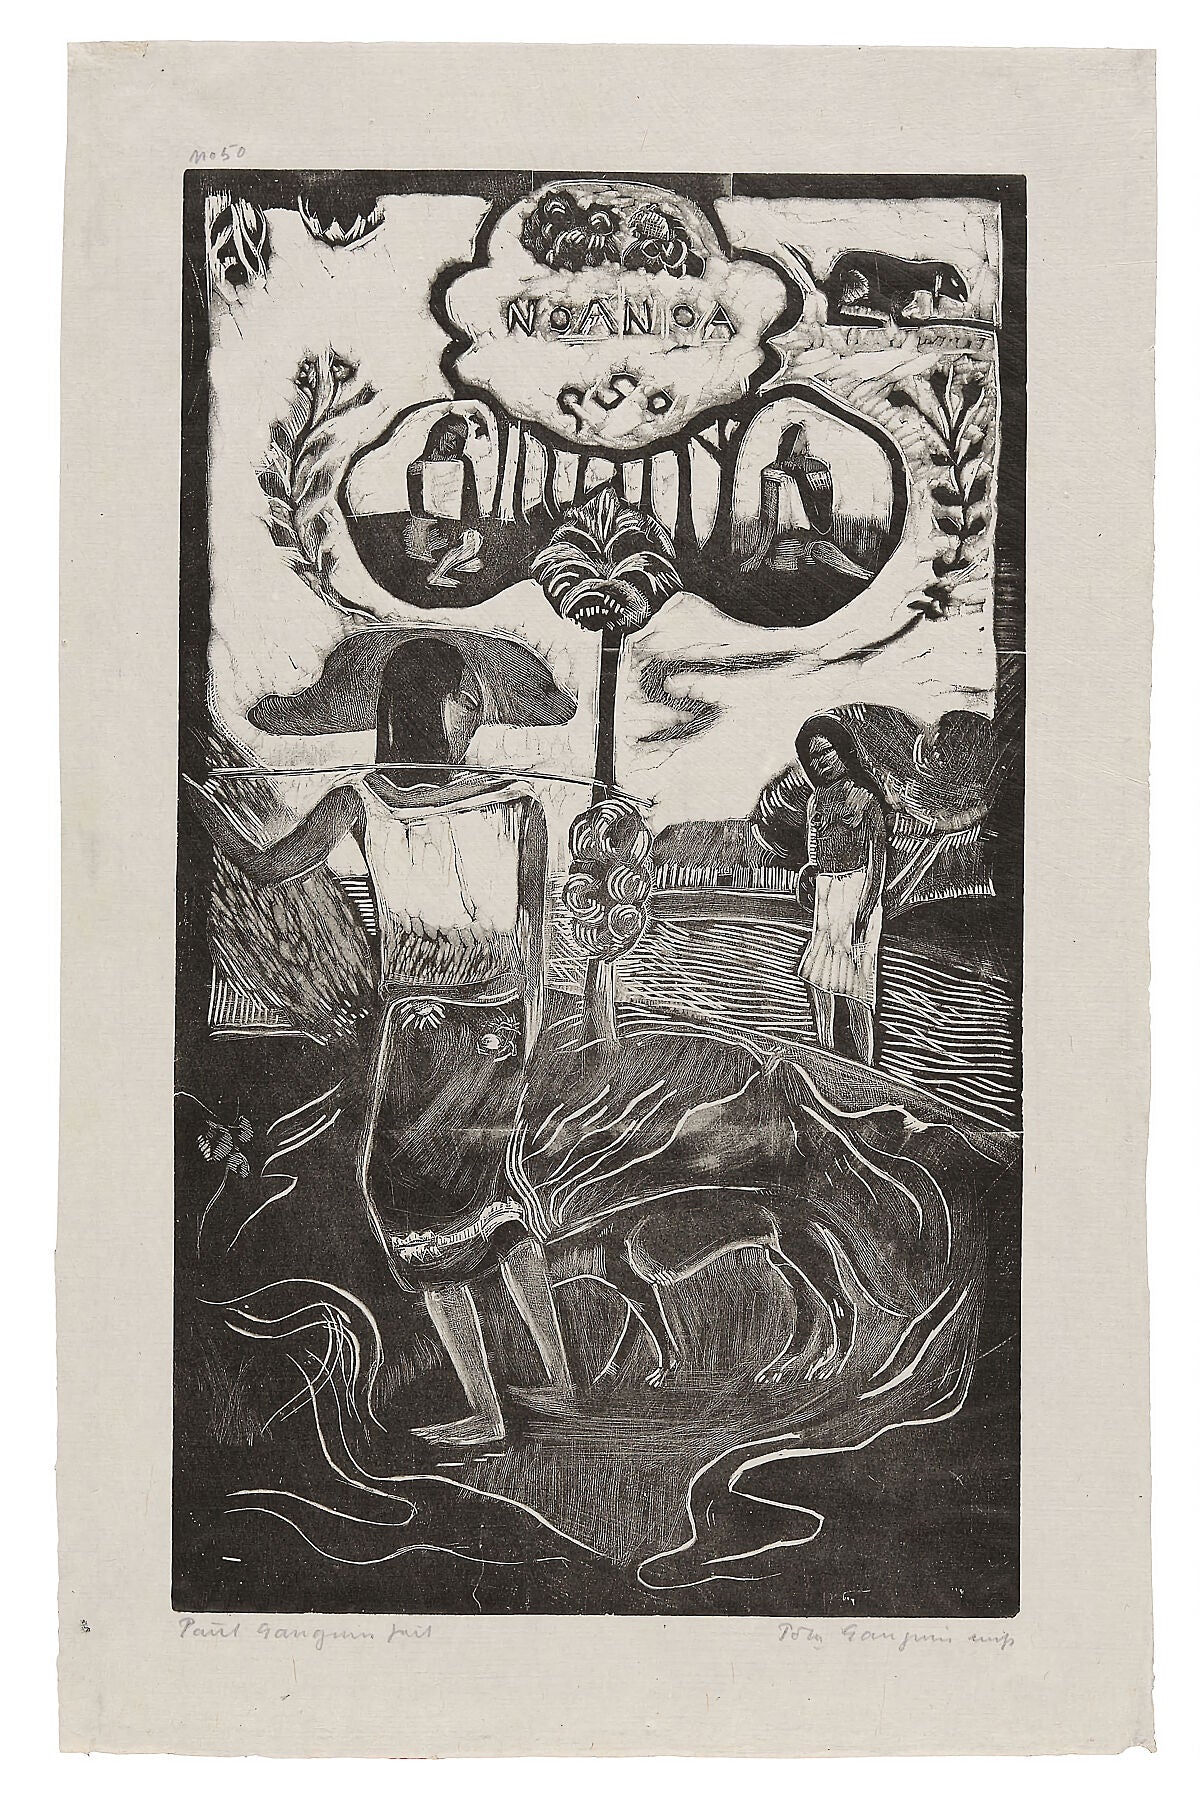 Noa Noa (Fragrant), from the Noa Noa Suite 1893–94, printed and published in 1921 - by Paul Gauguin.